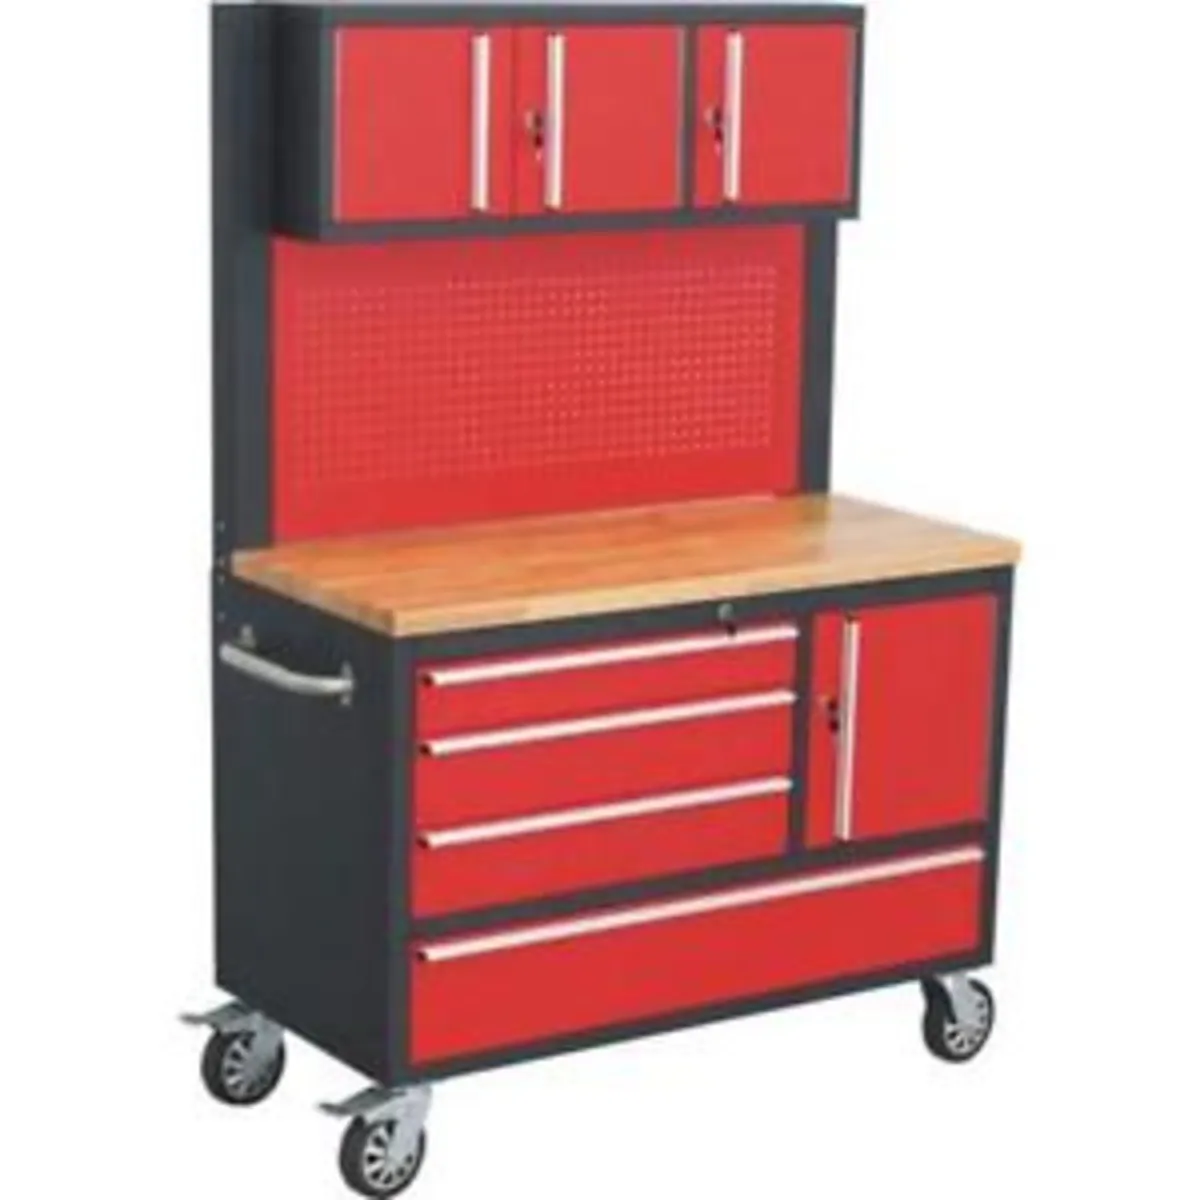 Toolchest  Toolbox  Work Station - Image 1